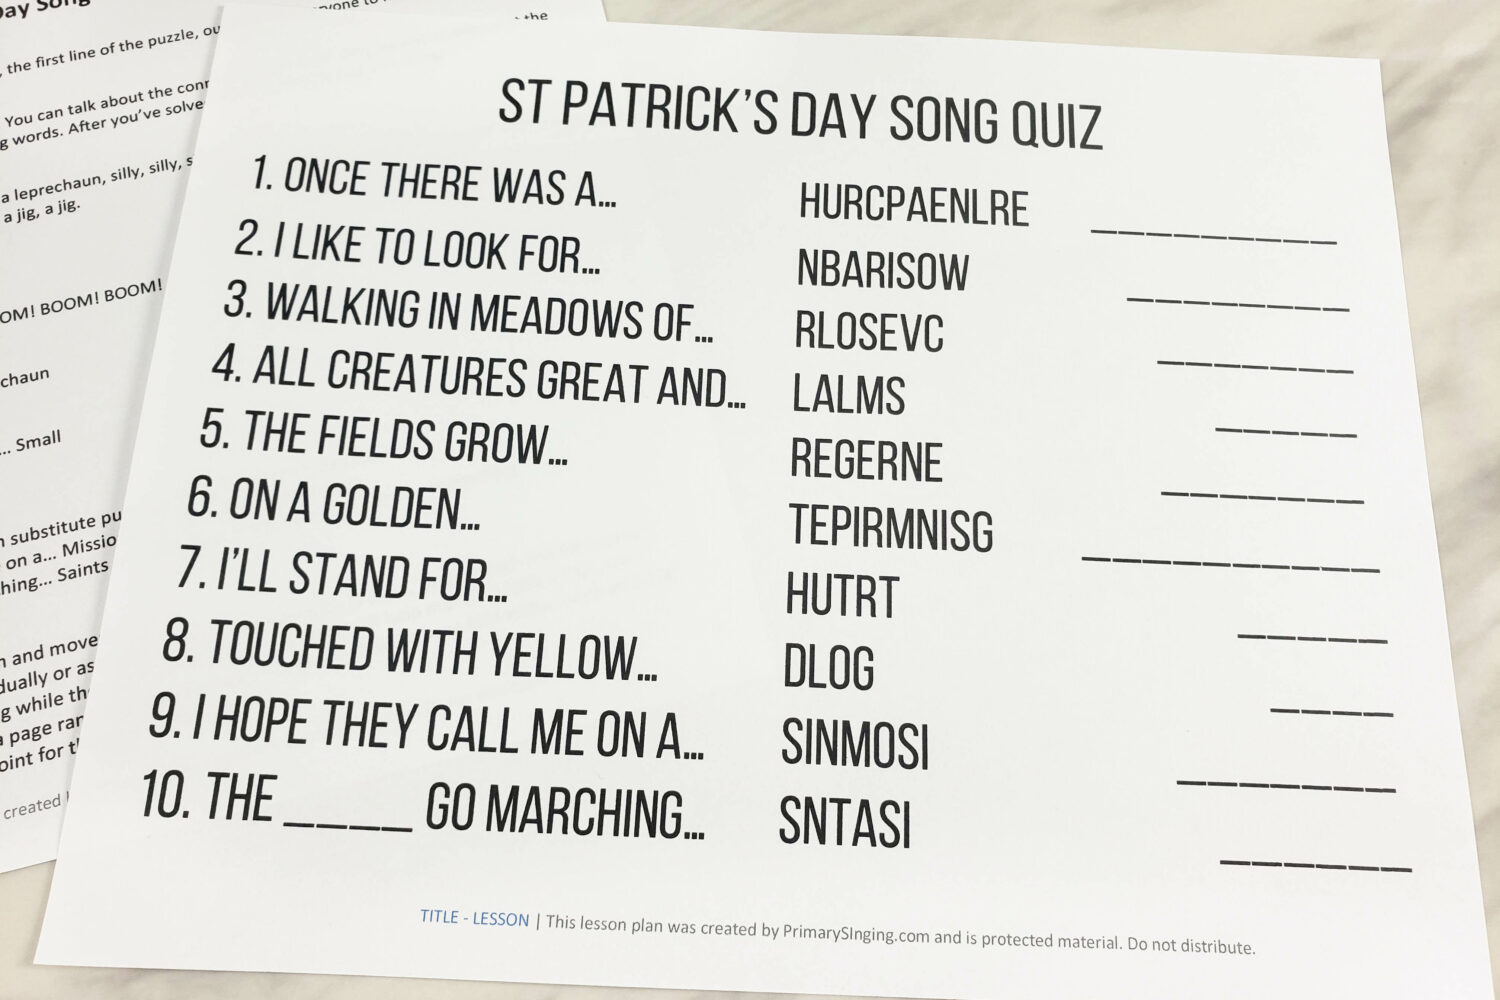 St Patrick's Day Singing Time Idea for LDS Primary Music Leaders - Printable Song Quiz game!